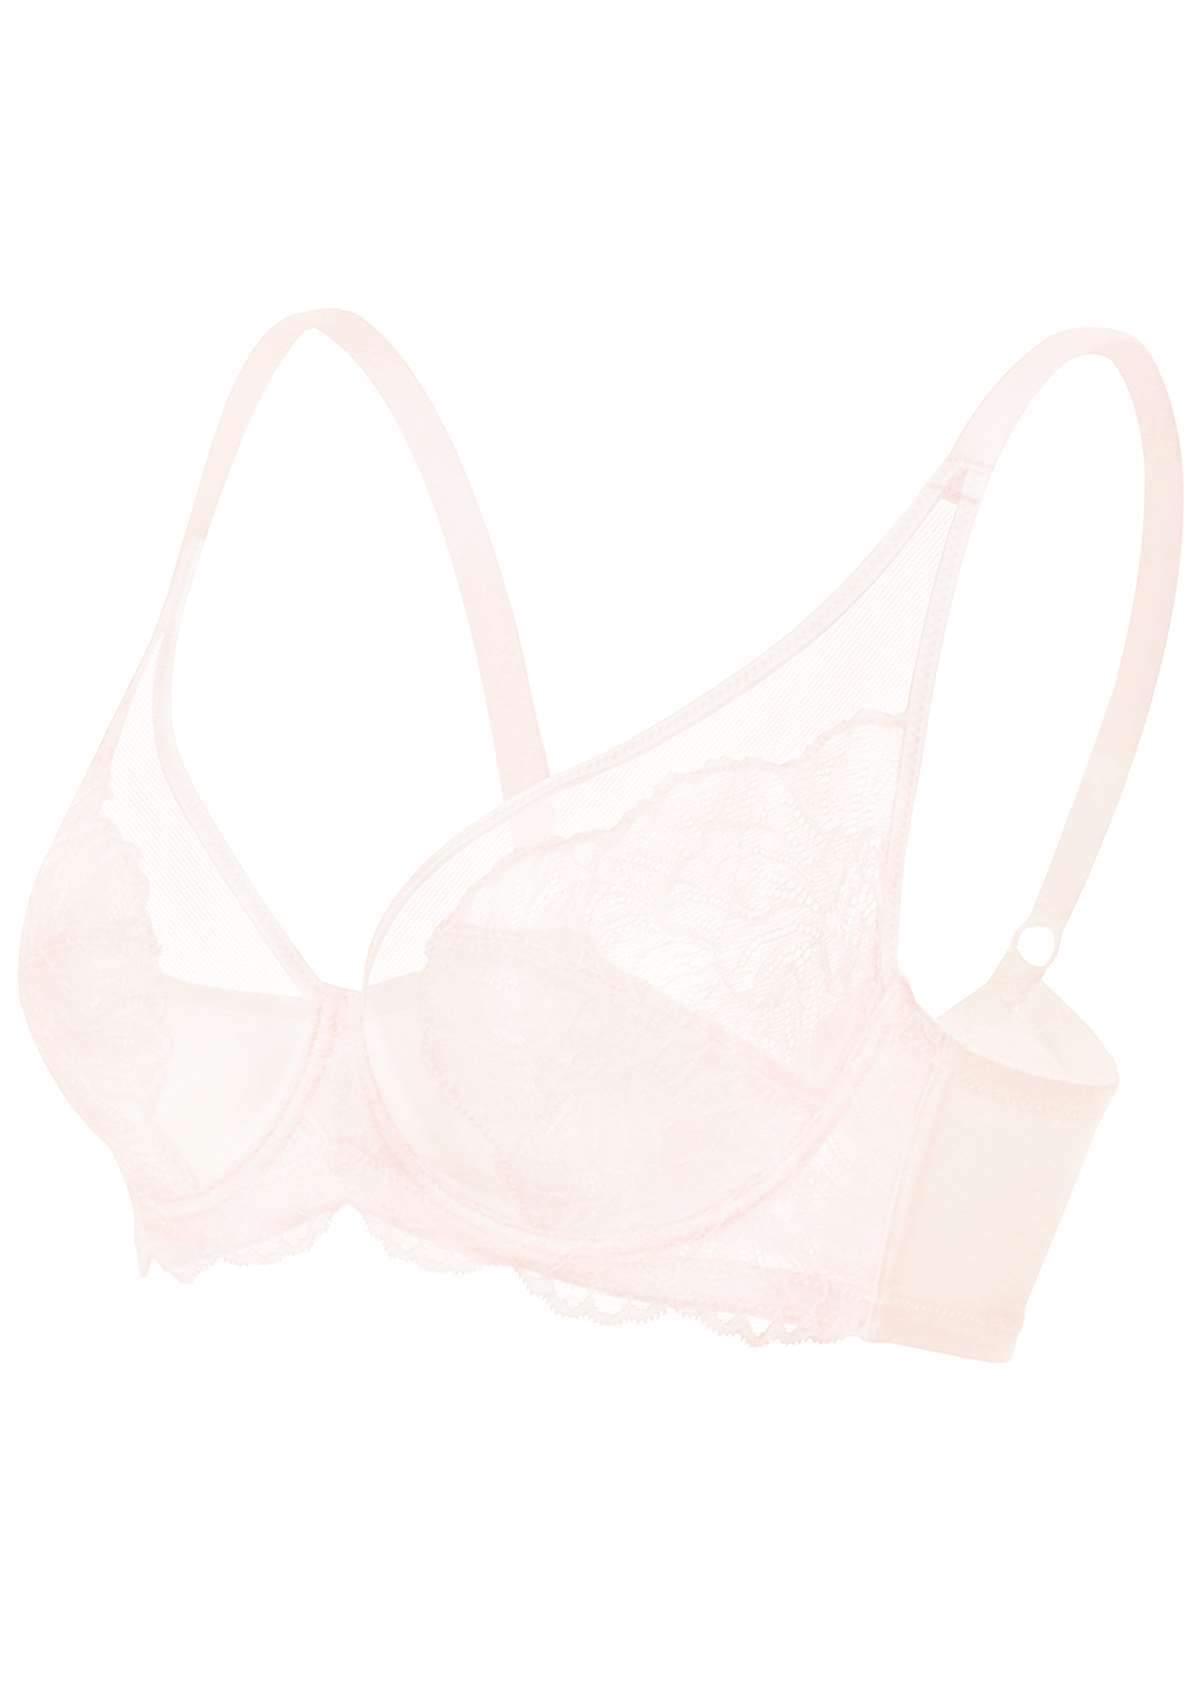 HSIA Blossom Sheer Lace Bra: Comfortable Underwire Bra For Big Busts - White / 44 / DDD/F